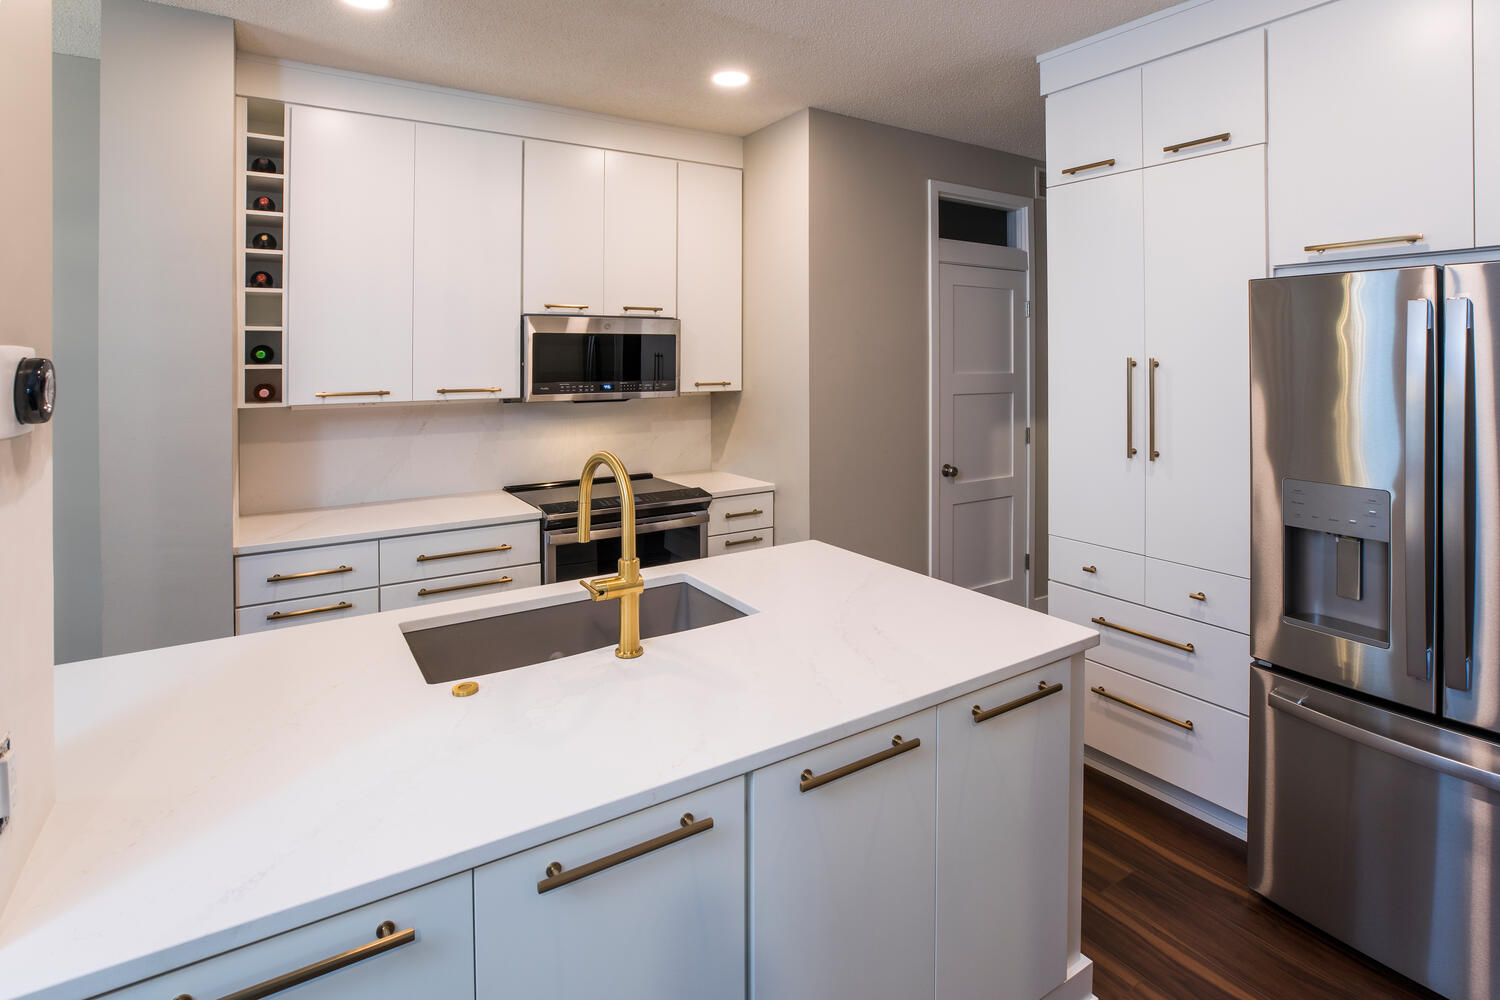 Modern Kitchen with White Cabinets and White Countertops from The Cabinet Store and Culina Design.